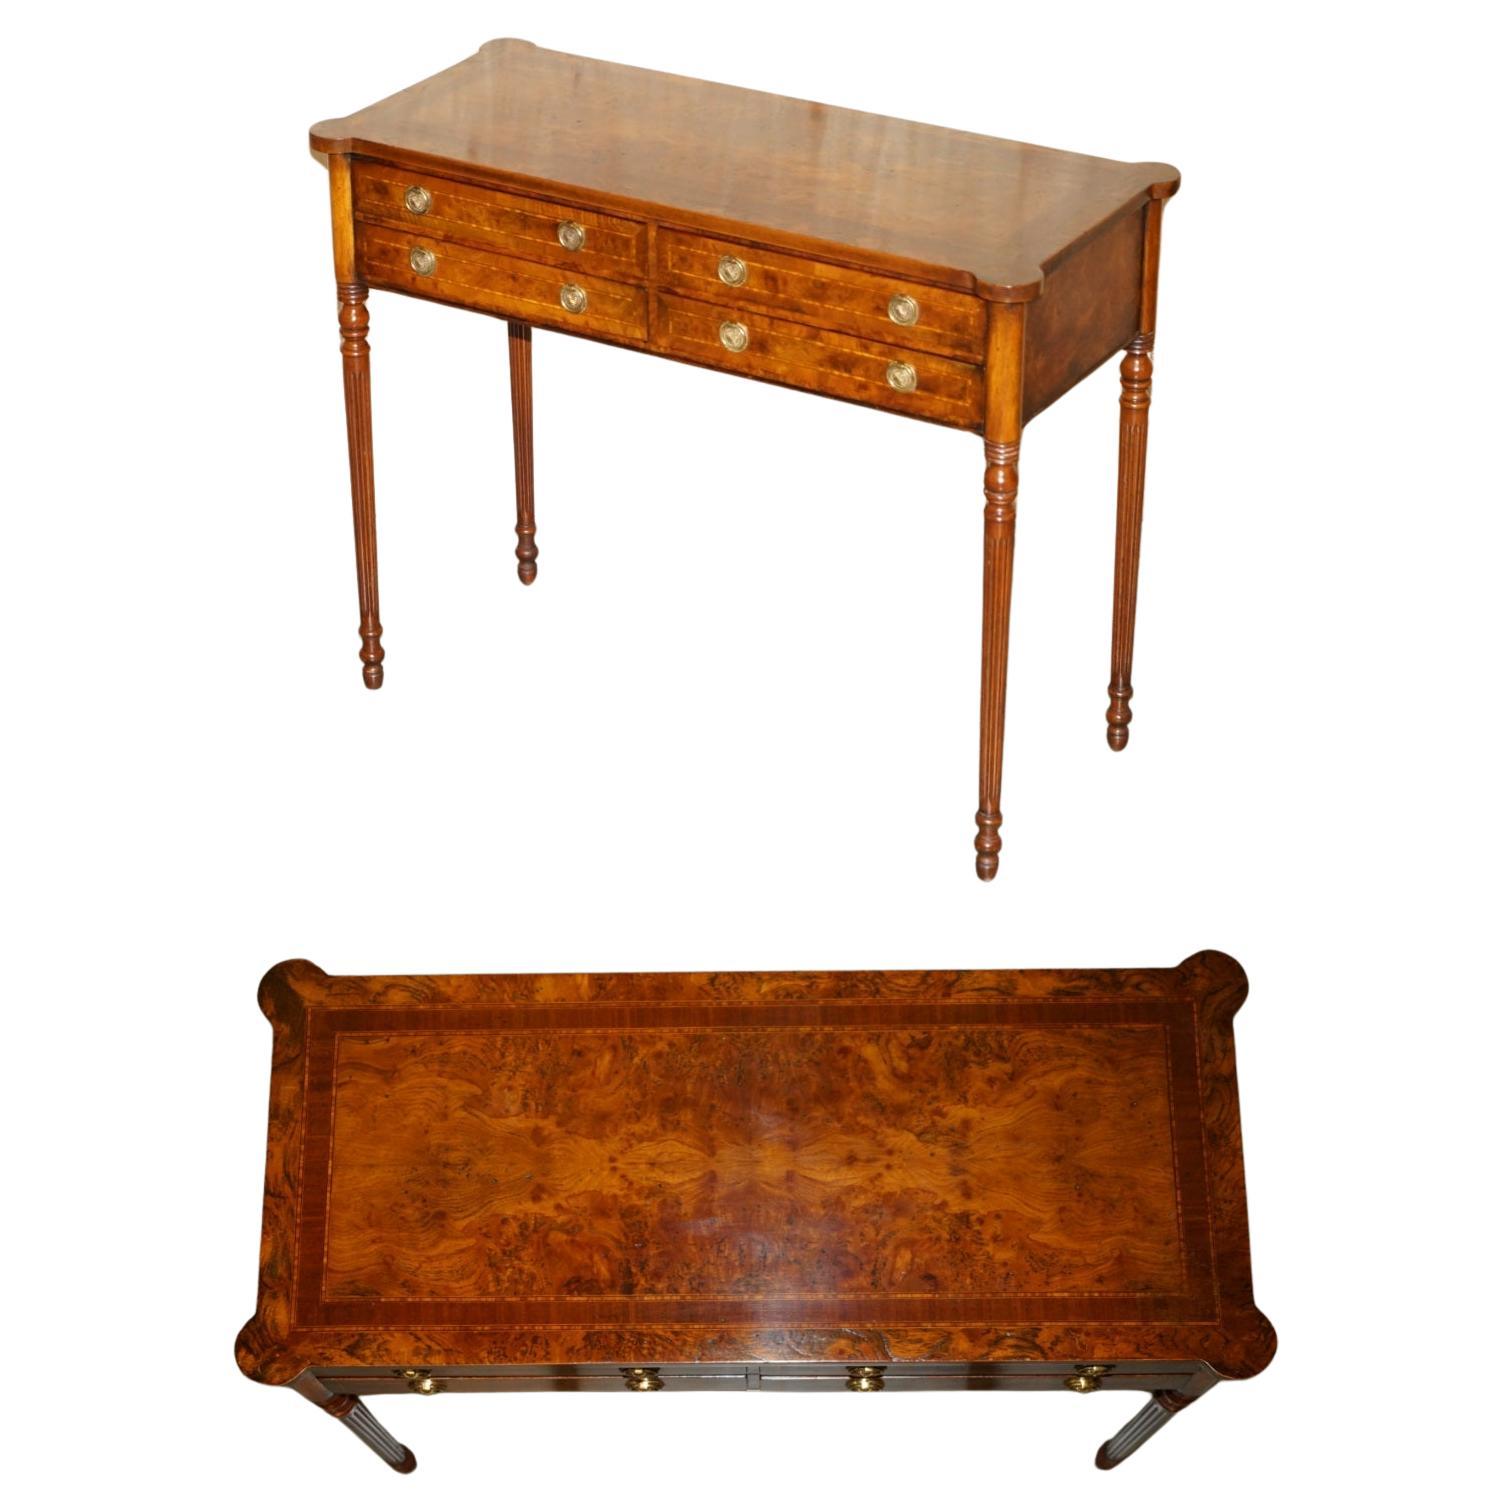 EXQUISITE CIRCA 1920 BURR ELM & SATiNWOOD FRENCH POLISHED RESTORED CONSOLE TABLE im Angebot